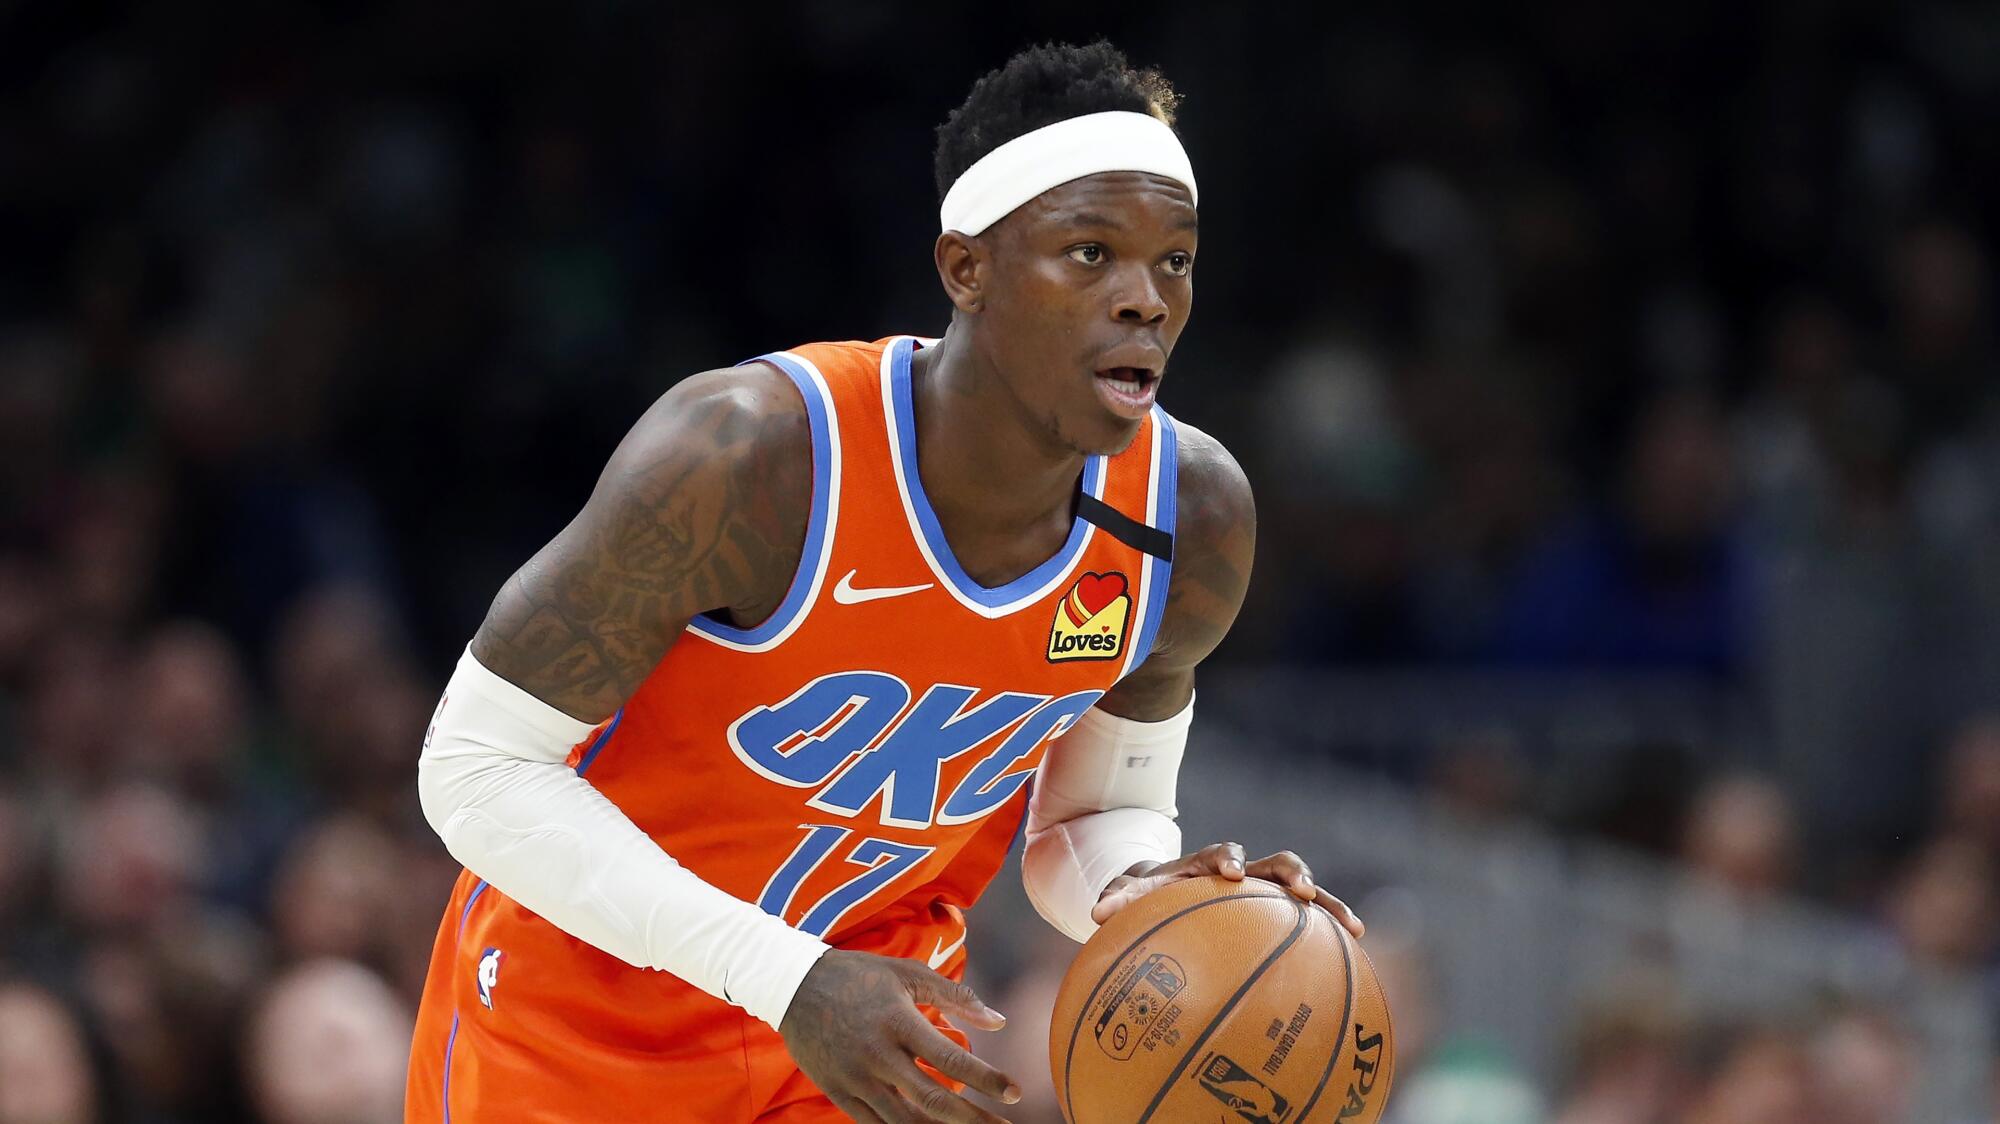 Oklahoma City guard Dennis Schröder sets up the offense during a game earlier this season in Boston.